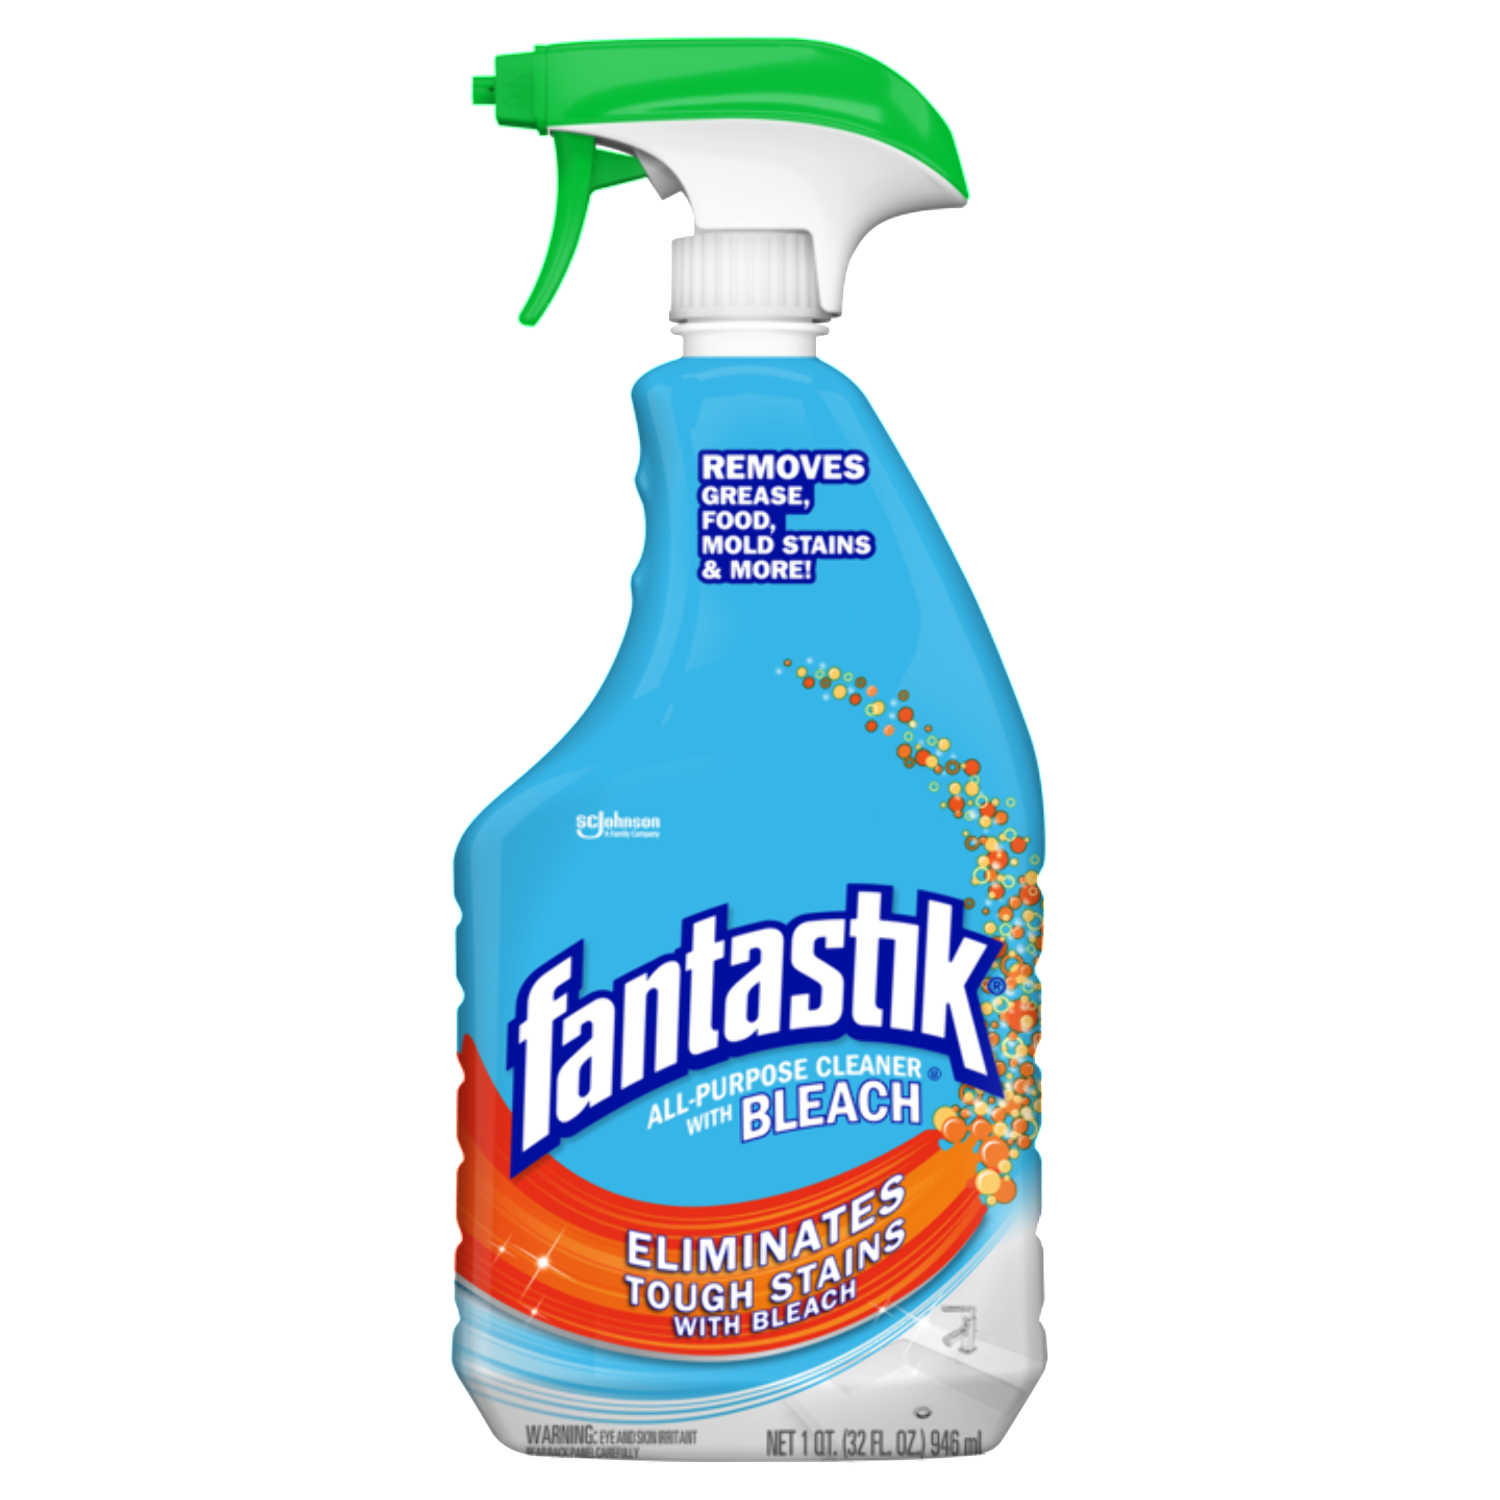 Fantastik Multi Surface Cleaners With Bleach Sc Johnson